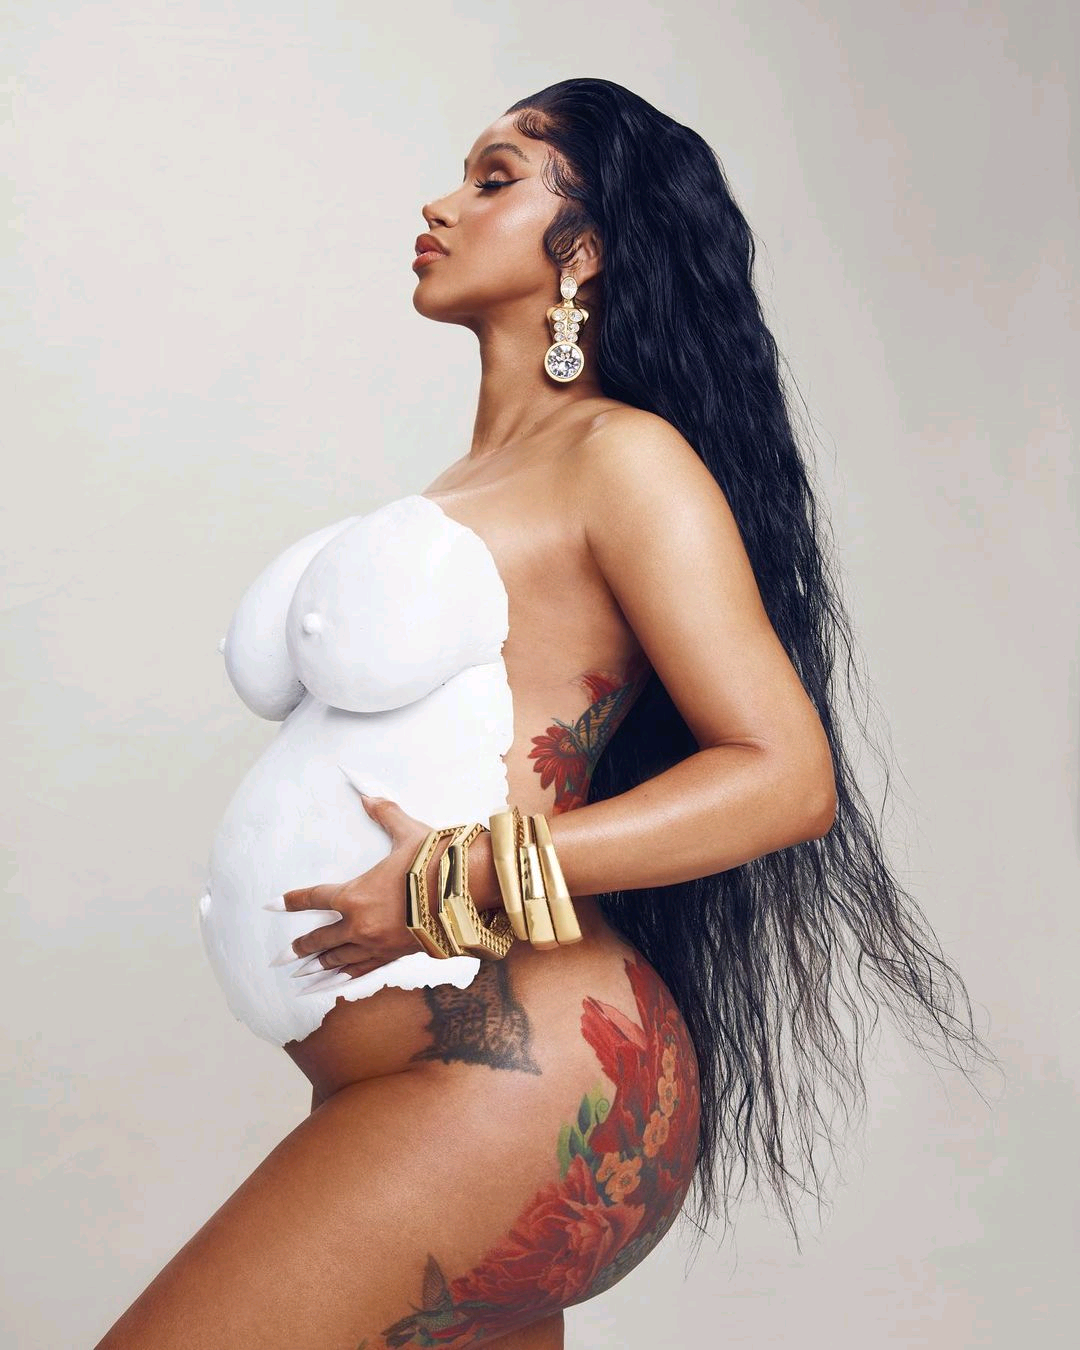 Cardi B Expecting Second Child With Offset